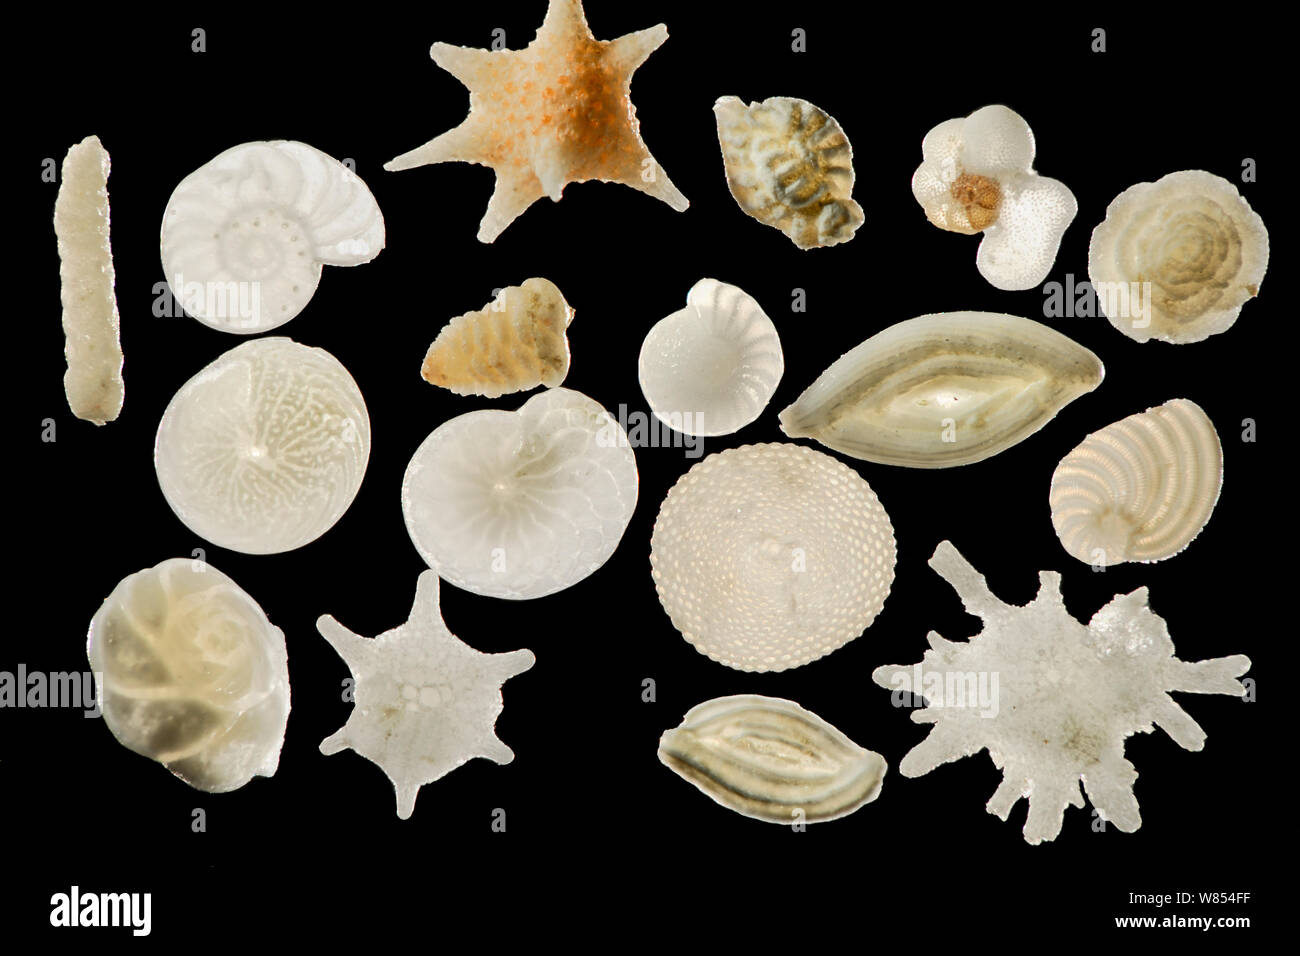 A variety of foraminiferes from a sand sample collected in Raja Ampat, Indonesia. The shells come from pelagic as well as bottom dwelling species that settle on sand, seagrass or coral reefs. Stock Photo